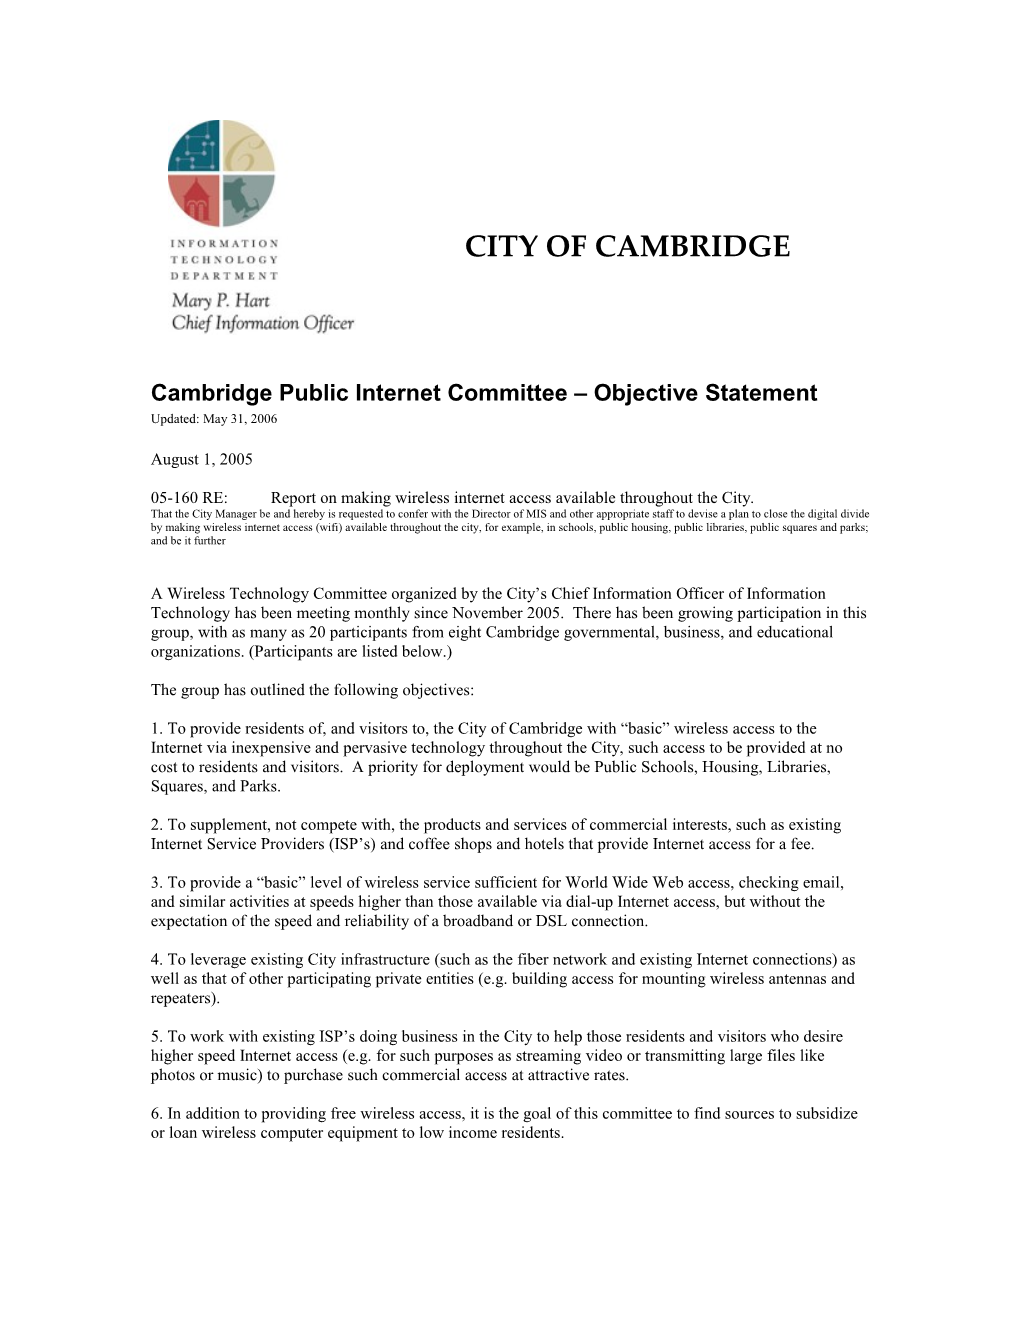 The Objective of the City of Cambridge Wireless Project Is to Deploy a Basic Wireless Service